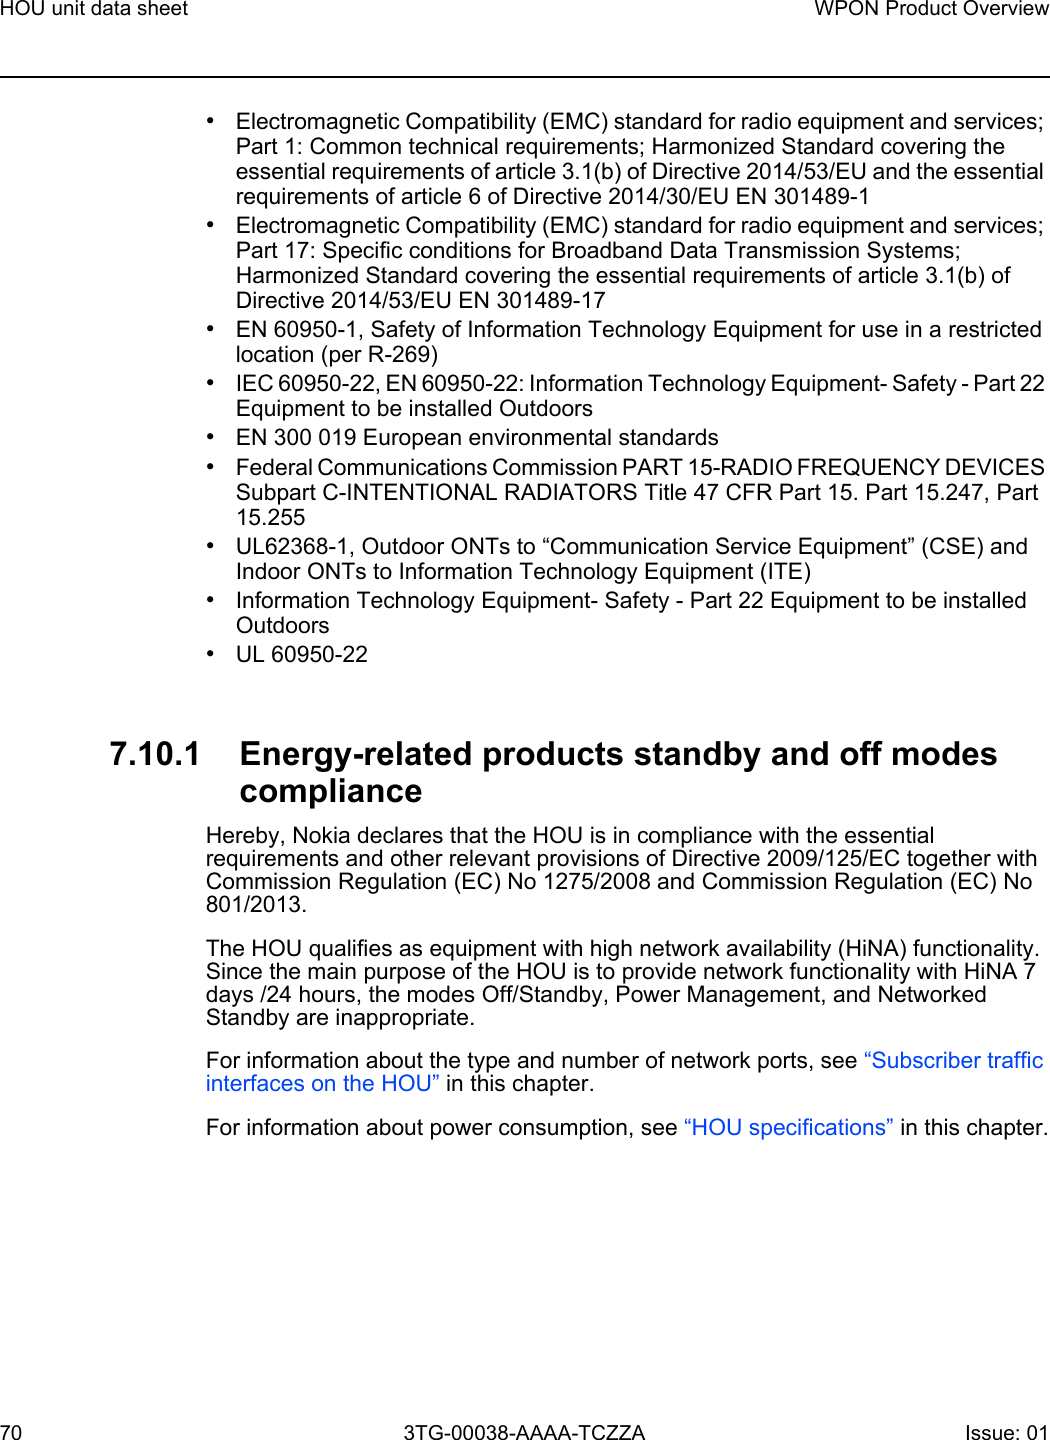 HOU unit data sheet70WPON Product Overview3TG-00038-AAAA-TCZZA Issue: 01 •Electromagnetic Compatibility (EMC) standard for radio equipment and services; Part 1: Common technical requirements; Harmonized Standard covering the essential requirements of article 3.1(b) of Directive 2014/53/EU and the essential requirements of article 6 of Directive 2014/30/EU EN 301489-1•Electromagnetic Compatibility (EMC) standard for radio equipment and services; Part 17: Specific conditions for Broadband Data Transmission Systems; Harmonized Standard covering the essential requirements of article 3.1(b) of Directive 2014/53/EU EN 301489-17•EN 60950-1, Safety of Information Technology Equipment for use in a restricted location (per R-269)•IEC 60950-22, EN 60950-22: Information Technology Equipment- Safety - Part 22 Equipment to be installed Outdoors•EN 300 019 European environmental standards•Federal Communications Commission PART 15-RADIO FREQUENCY DEVICES Subpart C-INTENTIONAL RADIATORS Title 47 CFR Part 15. Part 15.247, Part 15.255•UL62368-1, Outdoor ONTs to “Communication Service Equipment” (CSE) and Indoor ONTs to Information Technology Equipment (ITE)•Information Technology Equipment- Safety - Part 22 Equipment to be installed Outdoors•UL 60950-227.10.1 Energy-related products standby and off modes complianceHereby, Nokia declares that the HOU is in compliance with the essential requirements and other relevant provisions of Directive 2009/125/EC together with Commission Regulation (EC) No 1275/2008 and Commission Regulation (EC) No 801/2013. The HOU qualifies as equipment with high network availability (HiNA) functionality. Since the main purpose of the HOU is to provide network functionality with HiNA 7 days /24 hours, the modes Off/Standby, Power Management, and Networked Standby are inappropriate.For information about the type and number of network ports, see “Subscriber traffic interfaces on the HOU” in this chapter.For information about power consumption, see “HOU specifications” in this chapter.